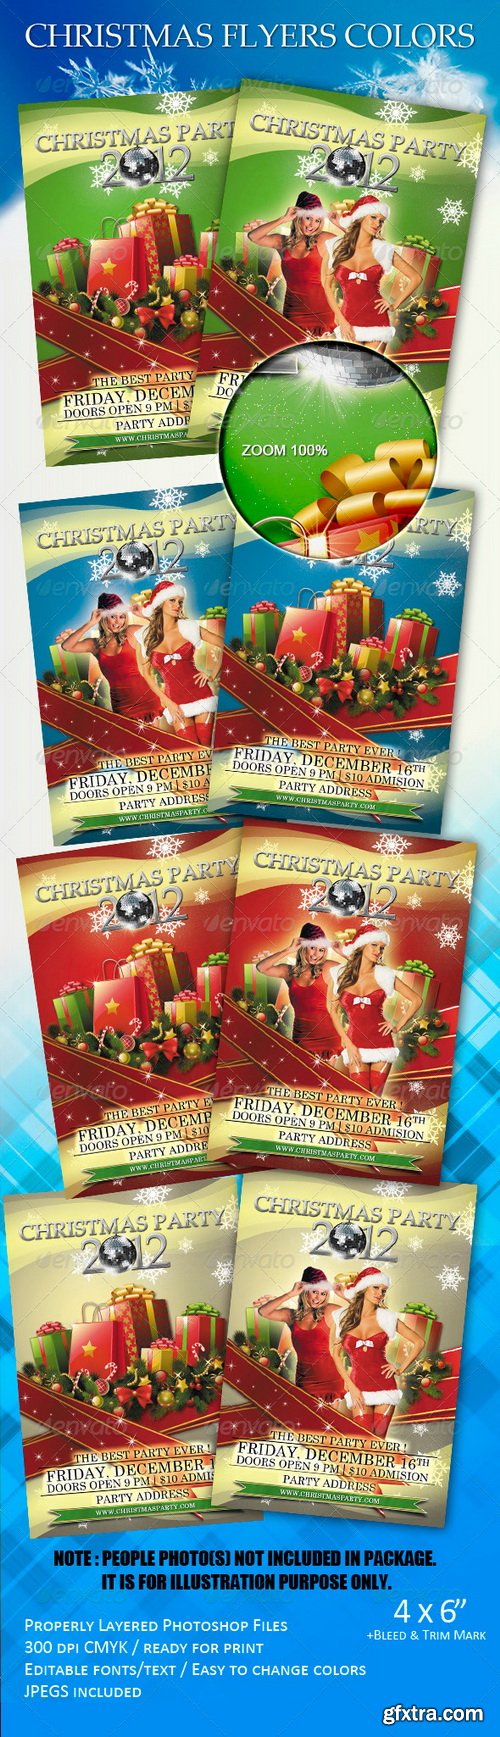 GraphicRiver - Christmas Flyers Colors 1095166